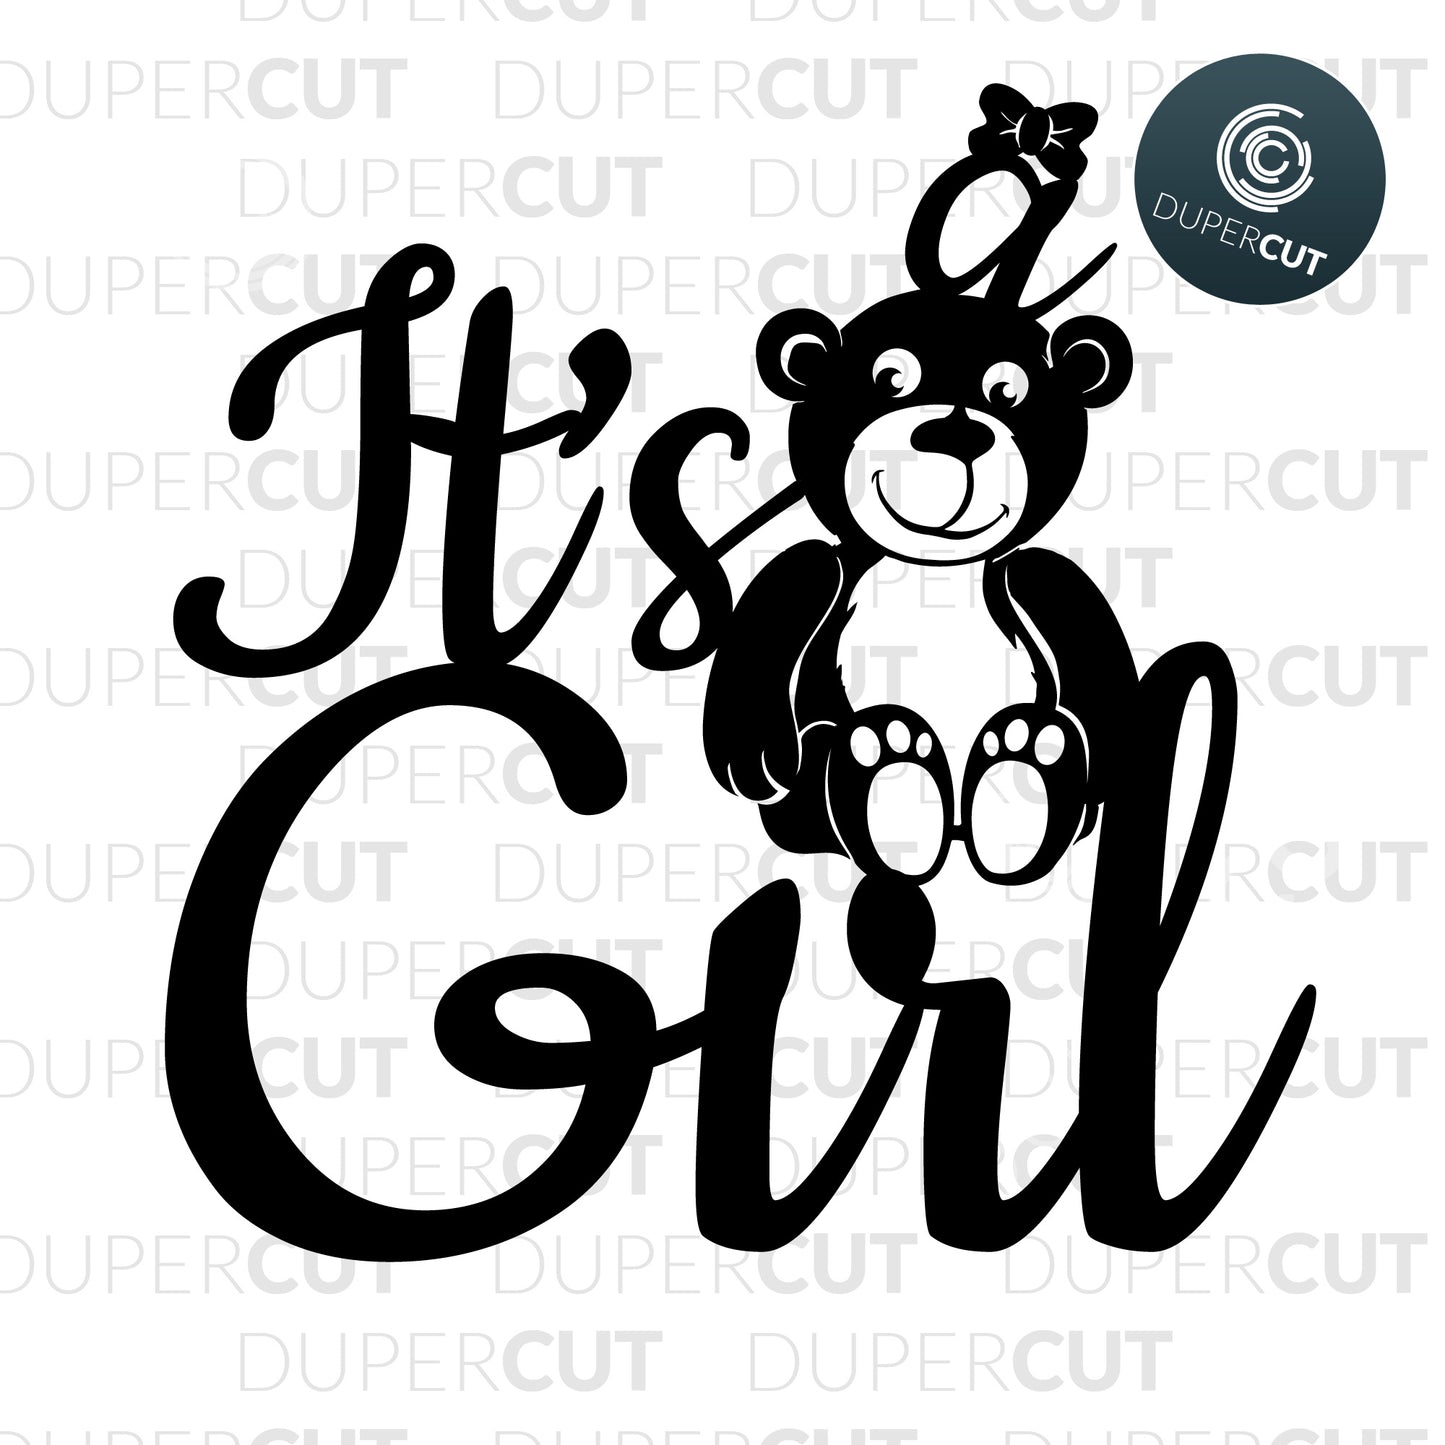 Cake topper for baby shower. Gender reveal party. It's a girl sign.Papercutting template for commercial use. SVG files for Silhouette Cameo, Cricut, Glowforge, DXF for CNC, laser cutting, print on demand